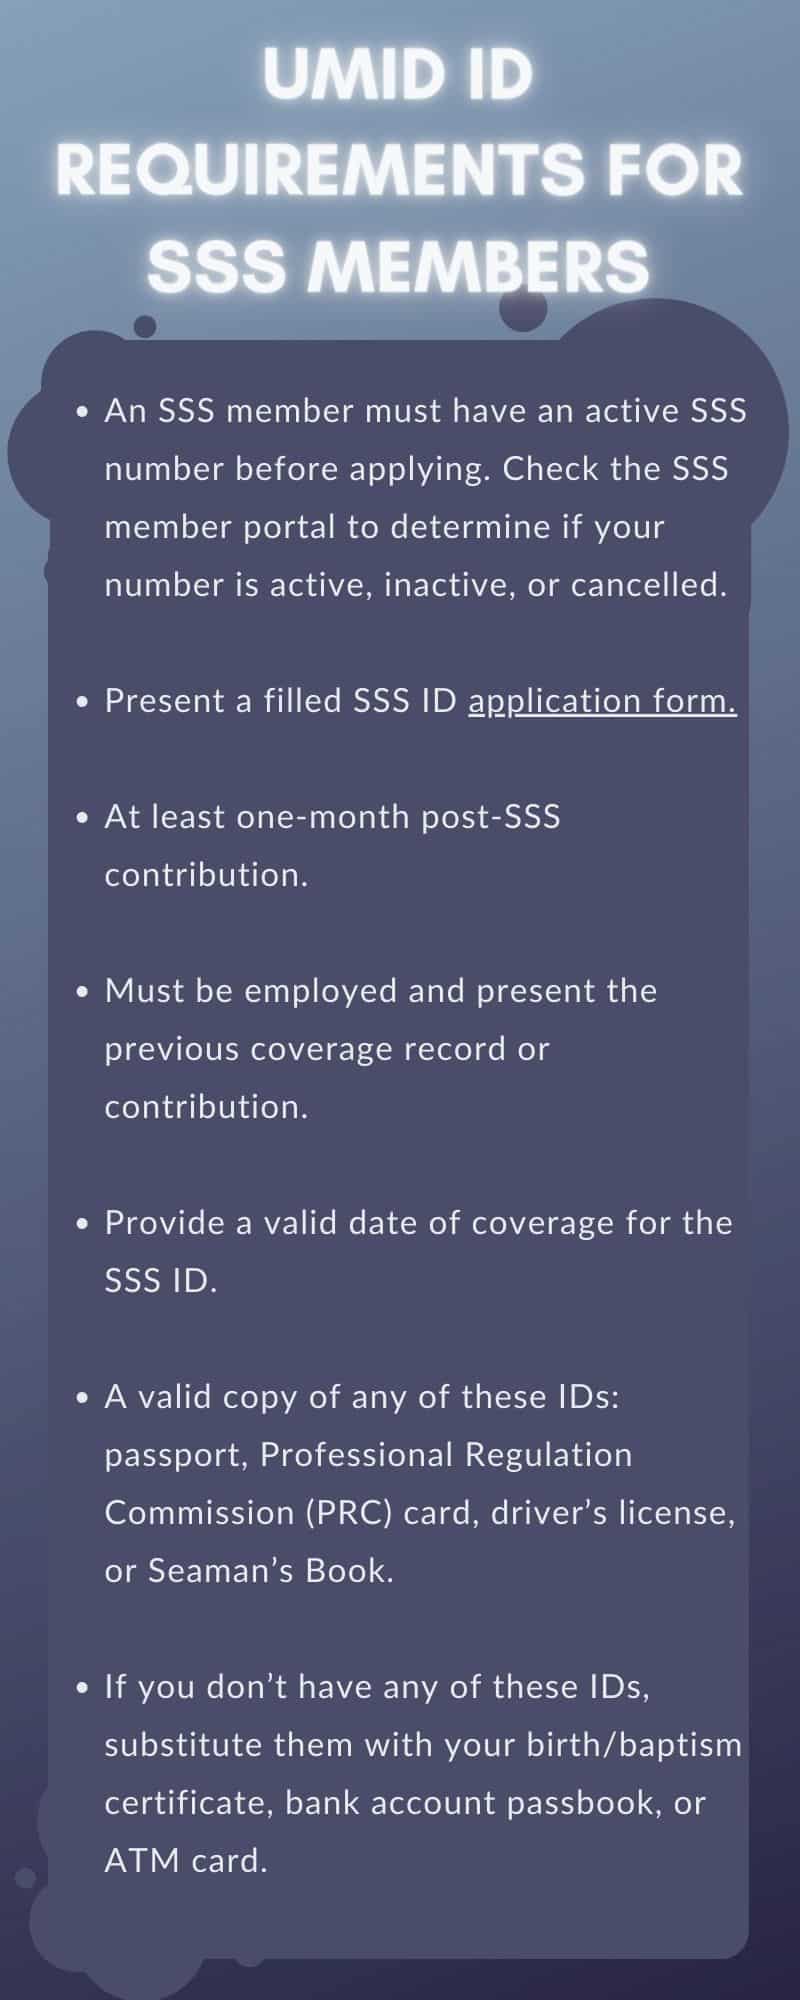 UMID ID requirements for SSS members